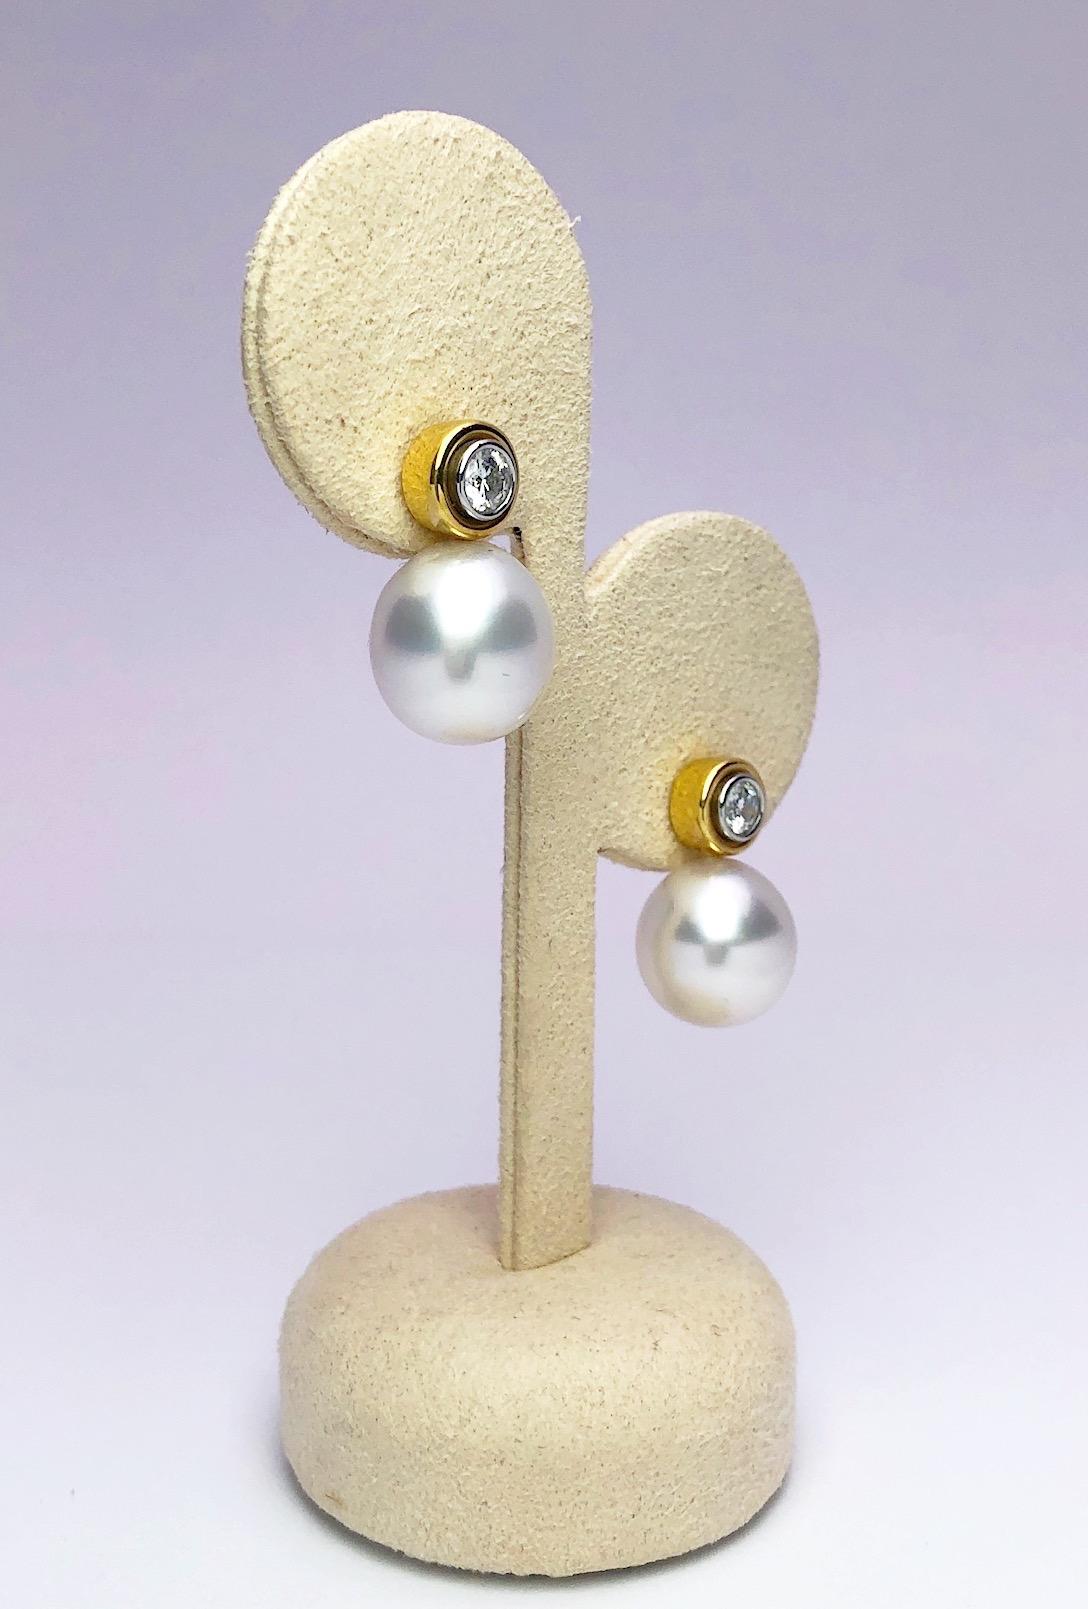 Classic South Sea Pearl and Diamond earring by Cellini Jewelers NYC. The earrings are designed with round brilliant diamonds set in an inner platinum bezel, then set in a larger 18 karat yellow gold bezel. A South Sea Pearl hangs from the bezel .The